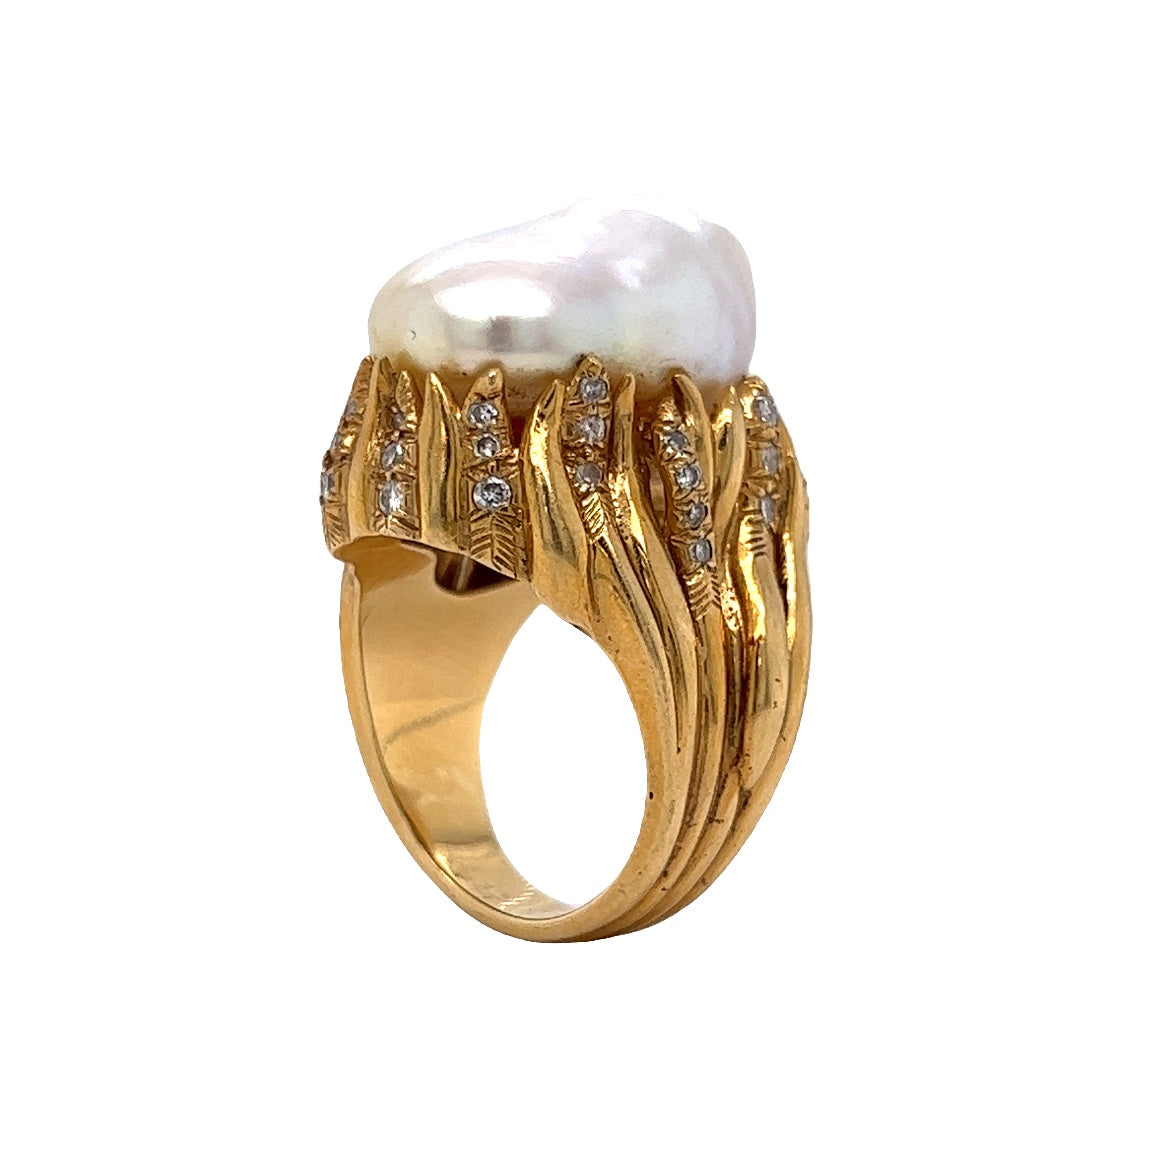 Vintage Mid-Century Pearl & Diamond Cocktail Ring in 18k Yellow Gold